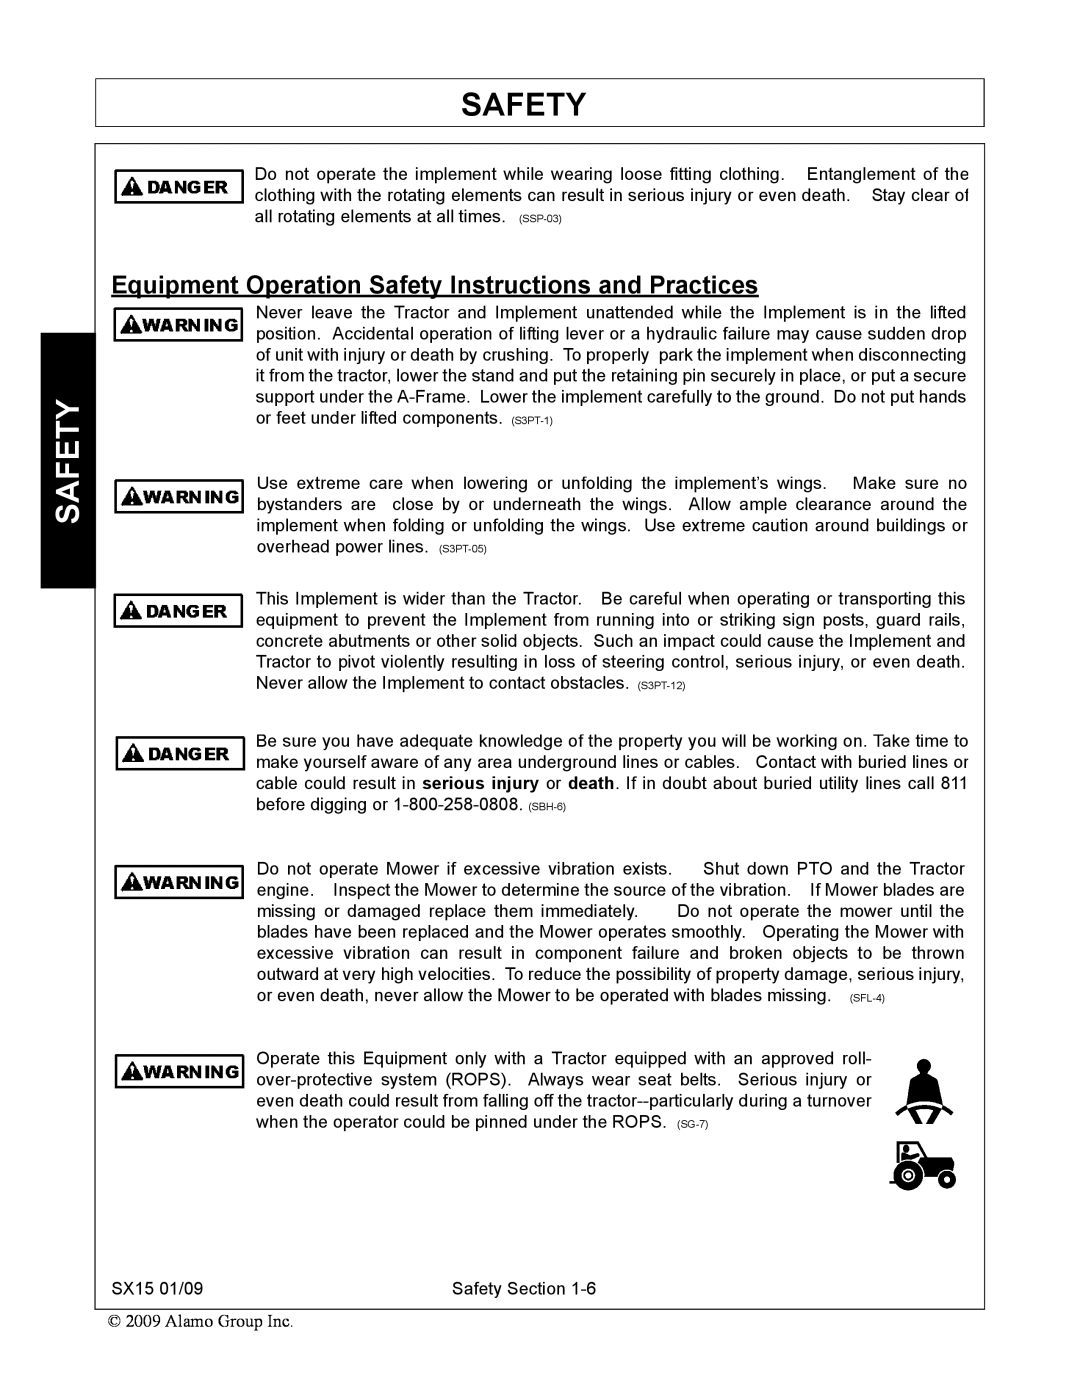 Alamo SX15 manual Equipment Operation Safety Instructions and Practices 